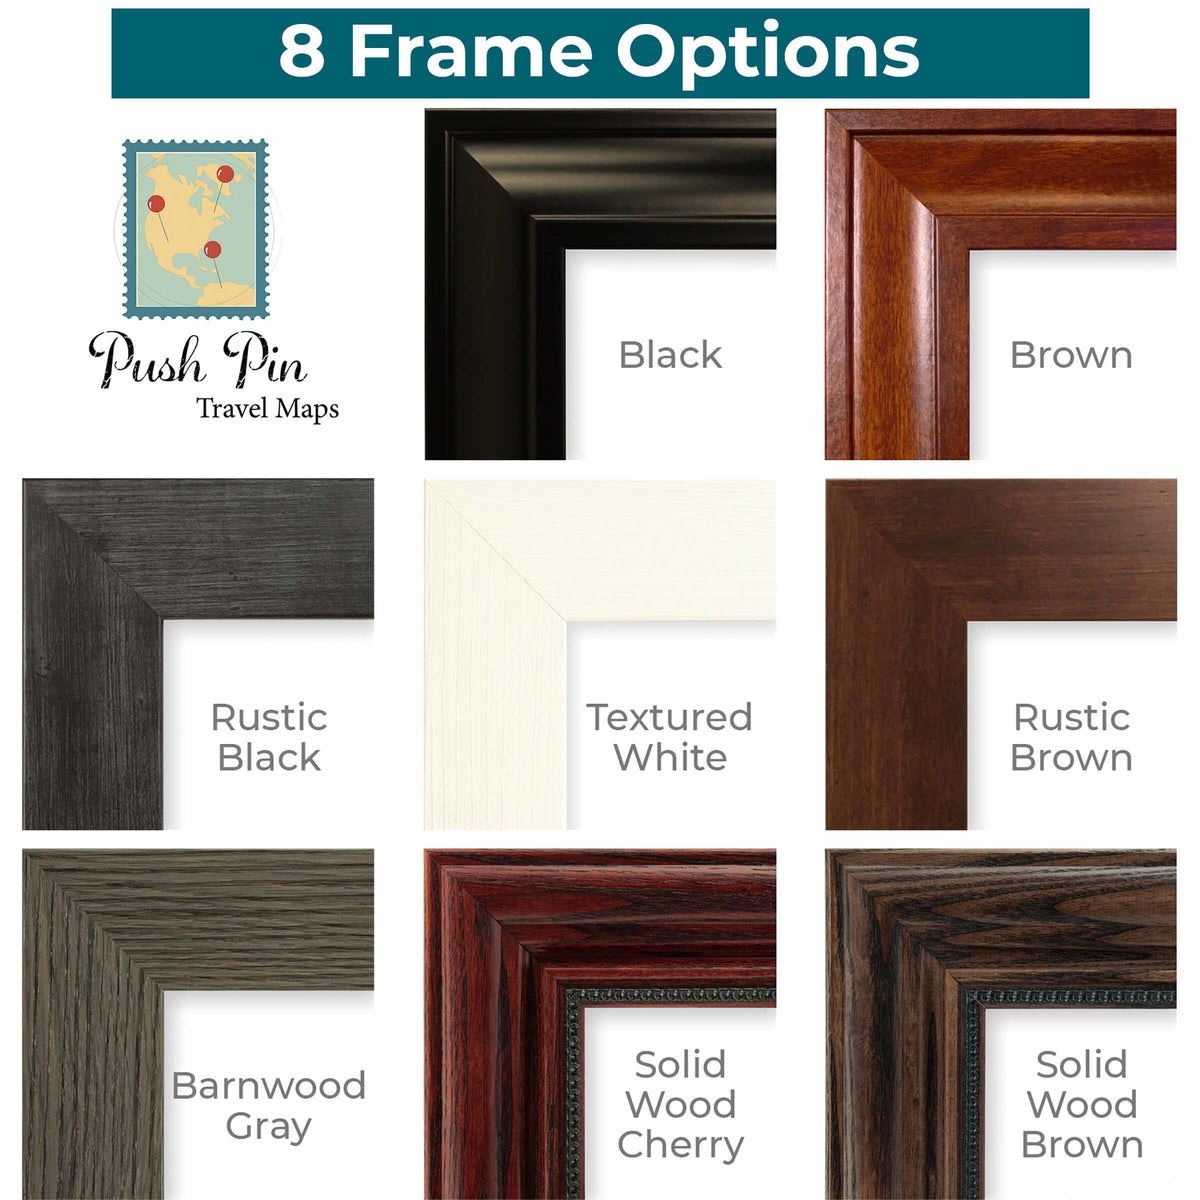 Standard Frame Options at Push Pin Travel Maps